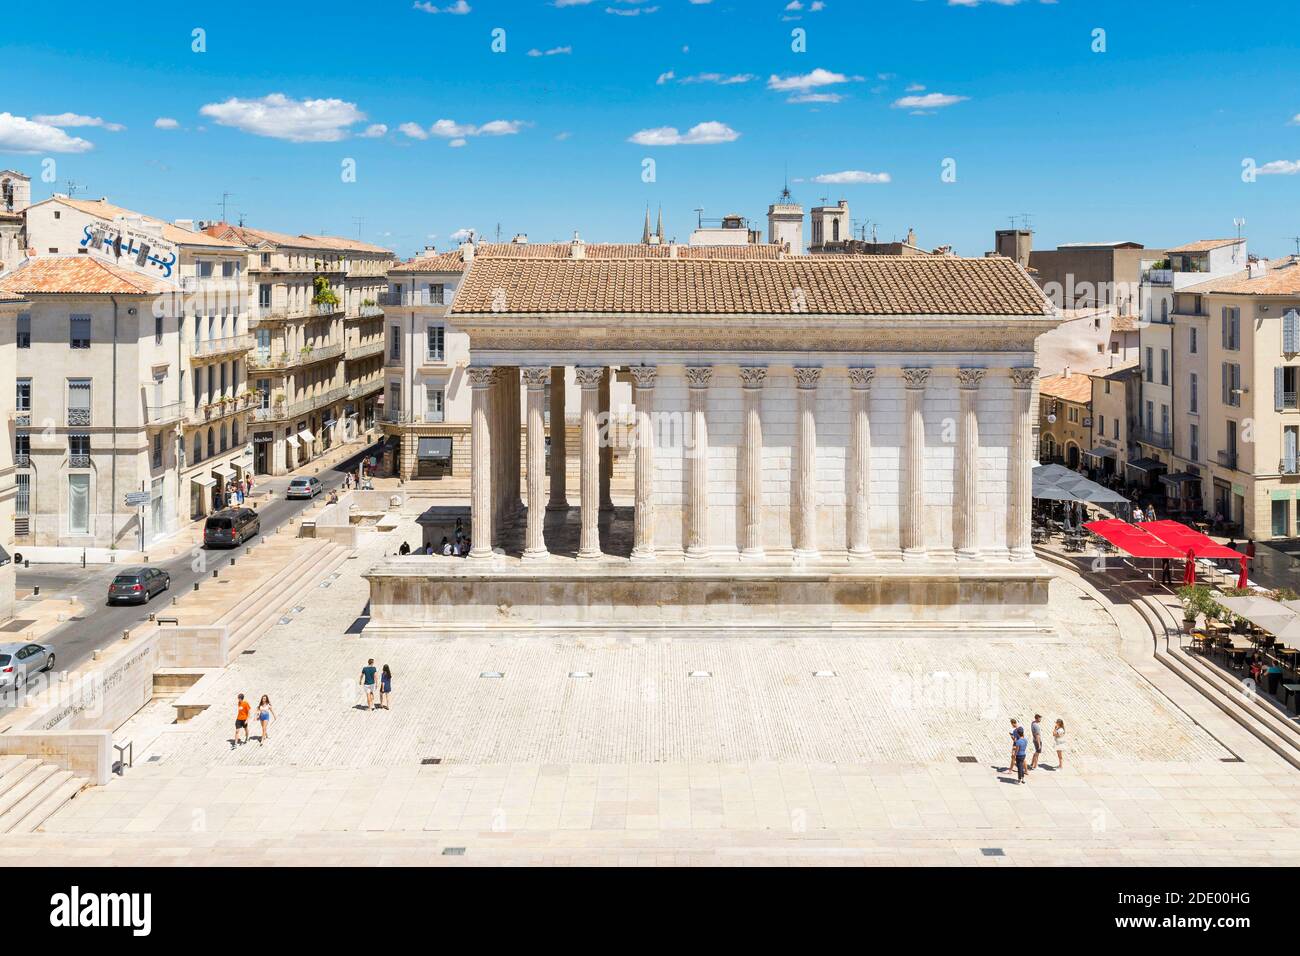 Nimes (south-eastern France): the Roman temple “Maison Carree” (Square House) viewed from the terrace of the “Ciel de Nimes” restaurant. Roman temple, Stock Photo